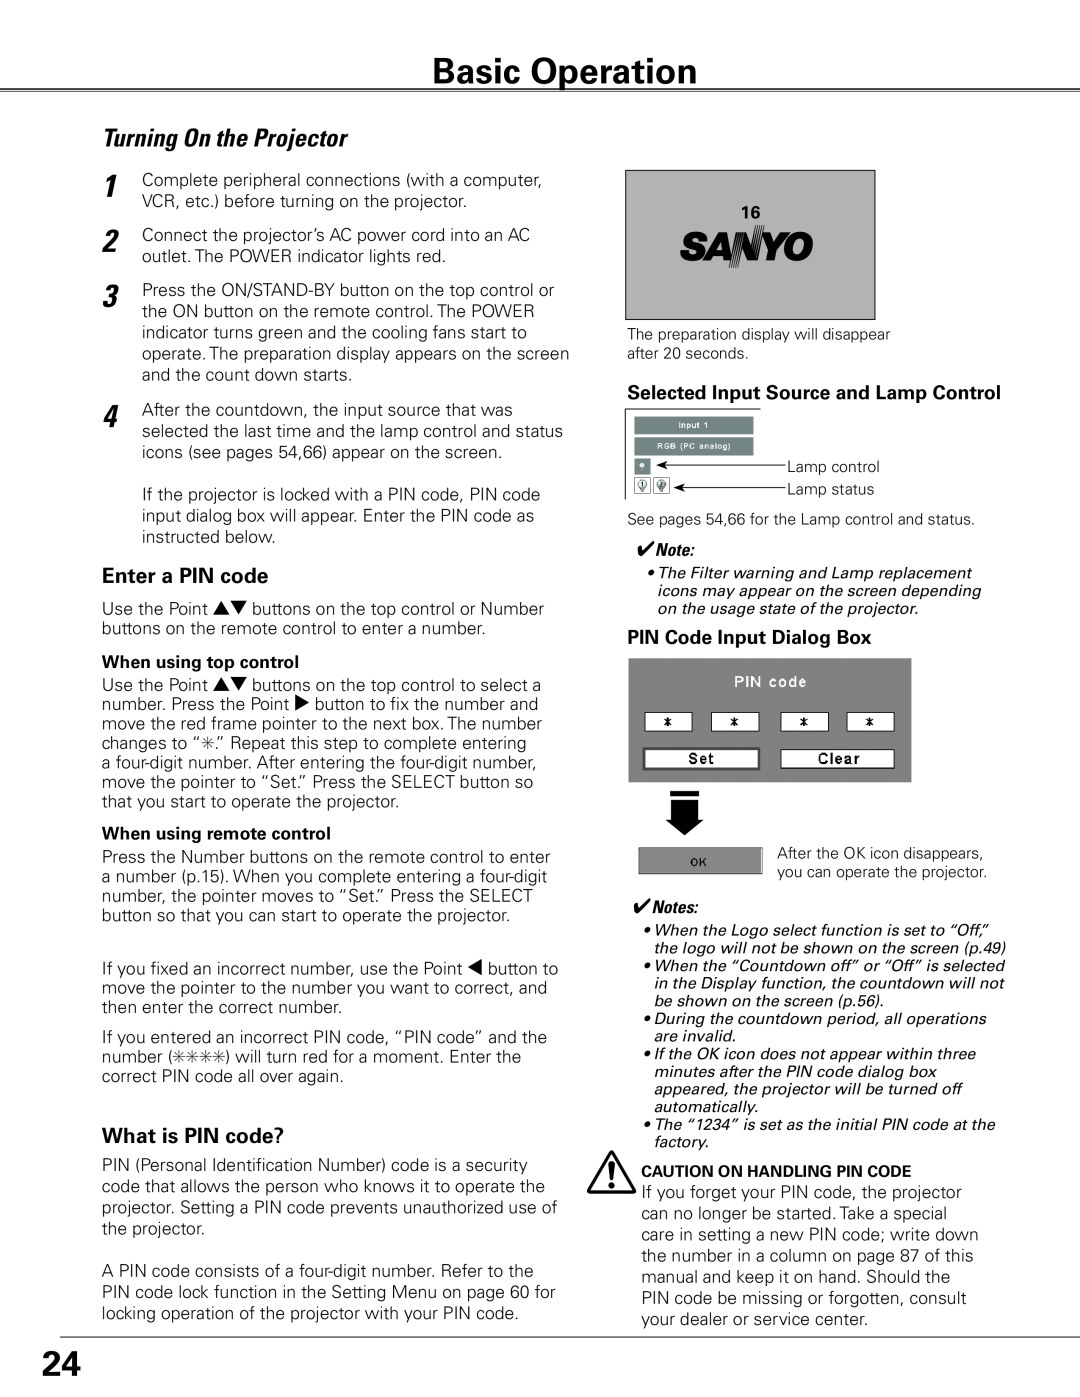 Sanyo WTC500L owner manual Basic Operation, Turning On the Projector, Notes 